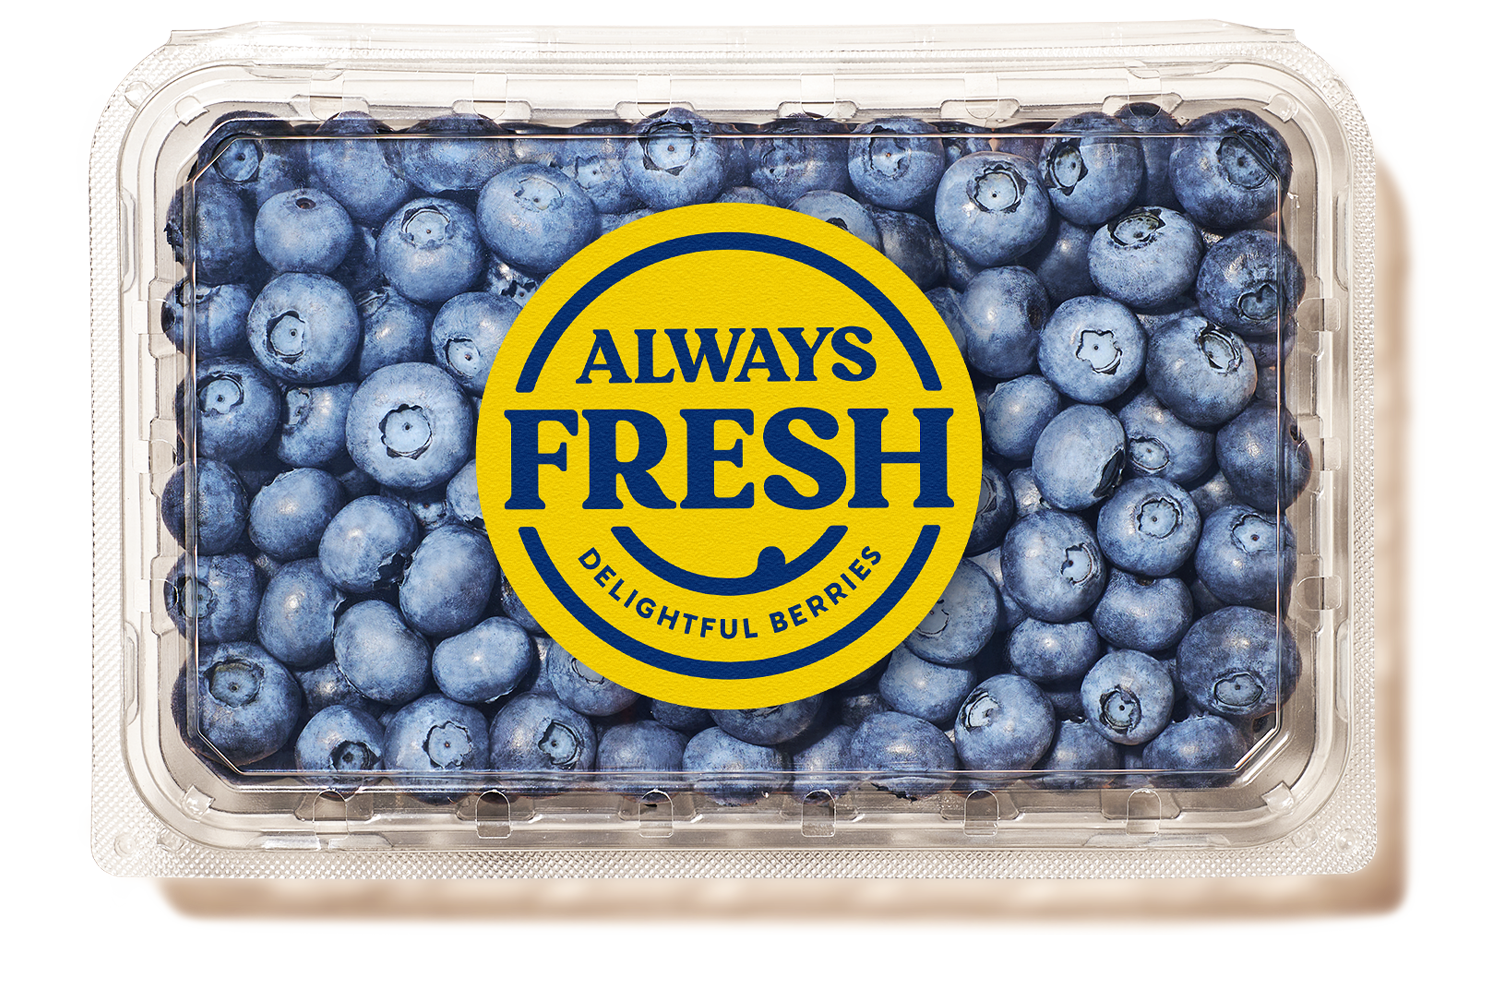 Image of Always Fresh Blueberries in clear container with Always Fresh logo and the tag line Delightful Berries.